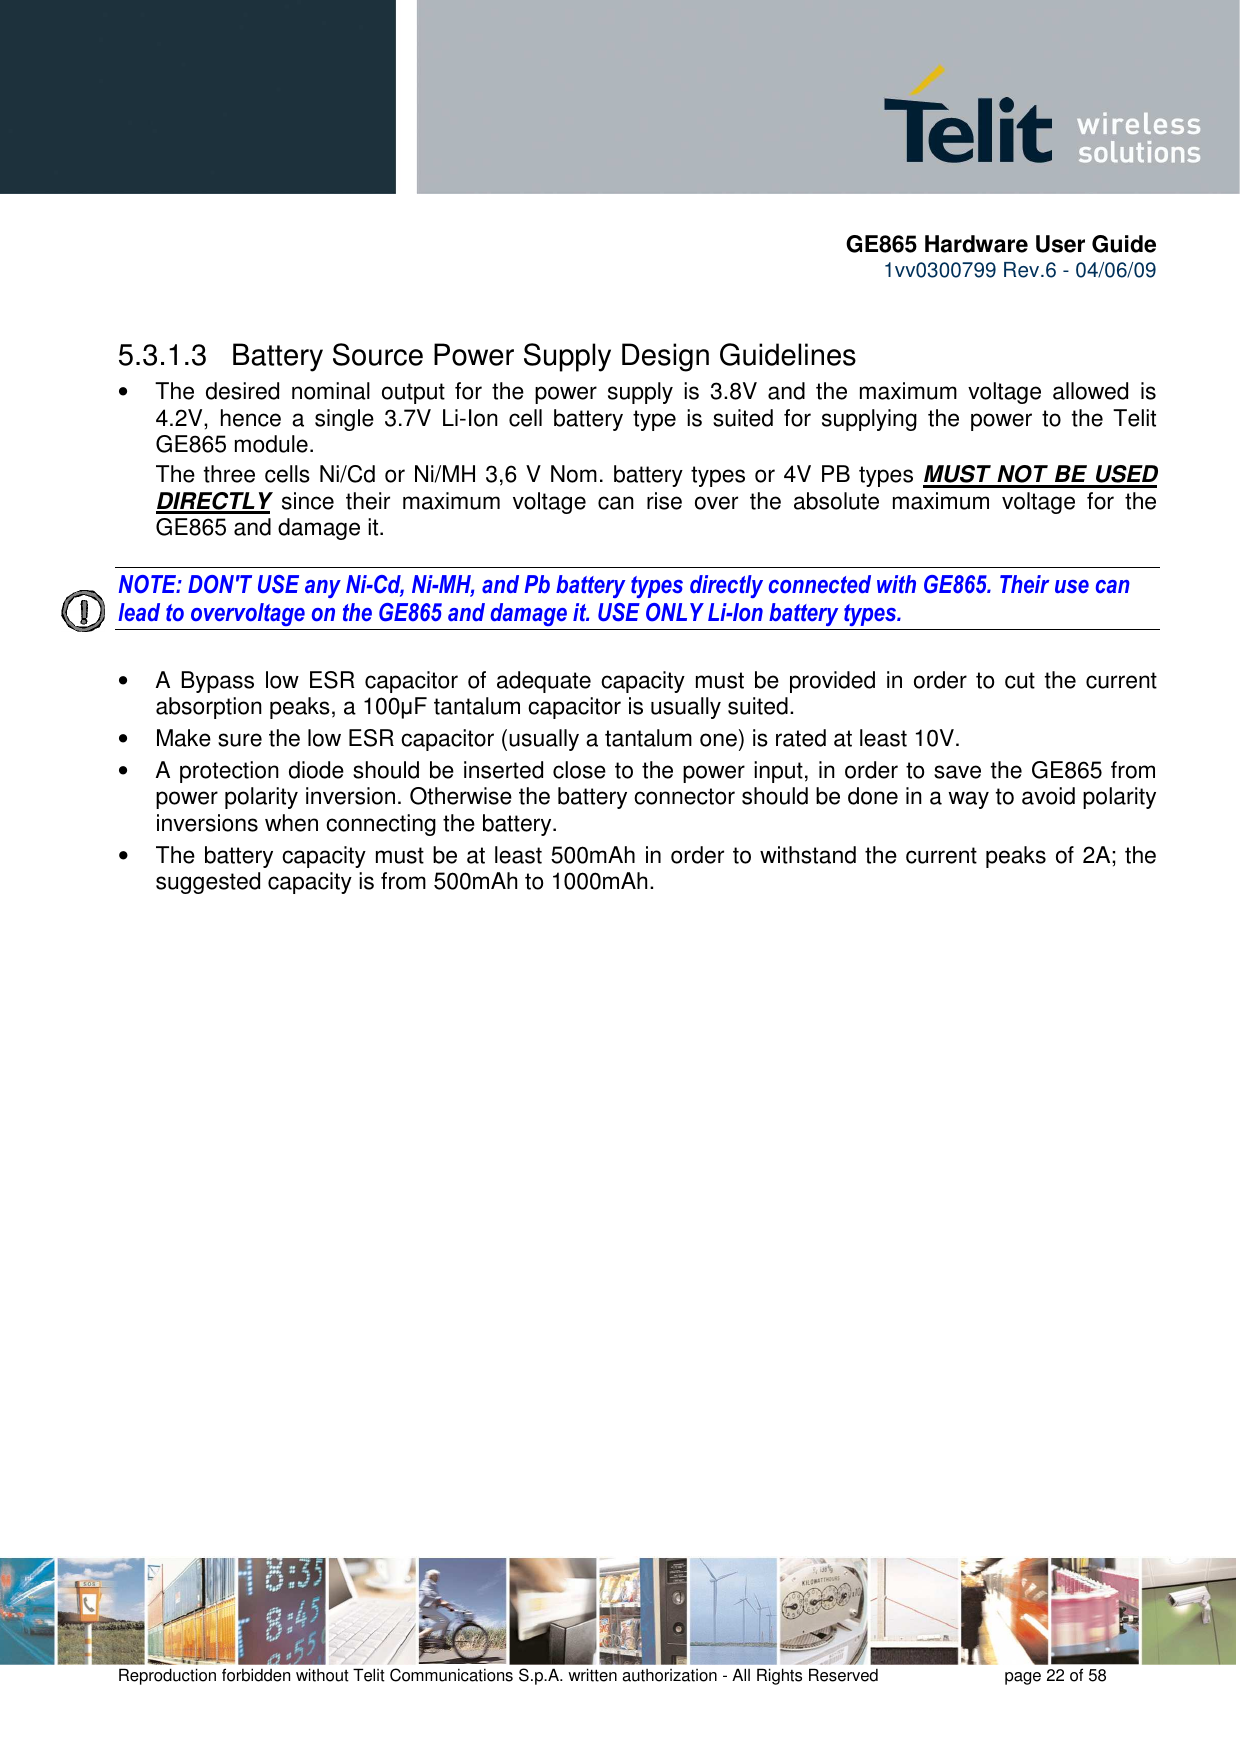       GE865 Hardware User Guide 1vv0300799 Rev.6 - 04/06/09      Reproduction forbidden without Telit Communications S.p.A. written authorization - All Rights Reserved    page 22 of 58    5.3.1.3   Battery Source Power Supply Design Guidelines •  The desired  nominal output  for  the  power supply  is  3.8V  and  the  maximum  voltage  allowed  is 4.2V,  hence  a  single 3.7V Li-Ion  cell  battery type is  suited  for  supplying  the  power  to  the Telit GE865 module. The three cells Ni/Cd or Ni/MH 3,6 V Nom. battery types or 4V PB types MUST NOT BE USED DIRECTLY  since  their  maximum  voltage  can  rise  over  the  absolute  maximum  voltage  for  the GE865 and damage it.  NOTE: DON&apos;T USE any Ni-Cd, Ni-MH, and Pb battery types directly connected with GE865. Their use can lead to overvoltage on the GE865 and damage it. USE ONLY Li-Ion battery types.  •  A  Bypass low ESR capacitor  of adequate capacity must be provided in order to cut the current absorption peaks, a 100µF tantalum capacitor is usually suited. •  Make sure the low ESR capacitor (usually a tantalum one) is rated at least 10V. •  A protection diode should be inserted close to the power input, in order to save the GE865 from power polarity inversion. Otherwise the battery connector should be done in a way to avoid polarity inversions when connecting the battery. •  The battery capacity must be at least 500mAh in order to withstand the current peaks of 2A; the suggested capacity is from 500mAh to 1000mAh. 